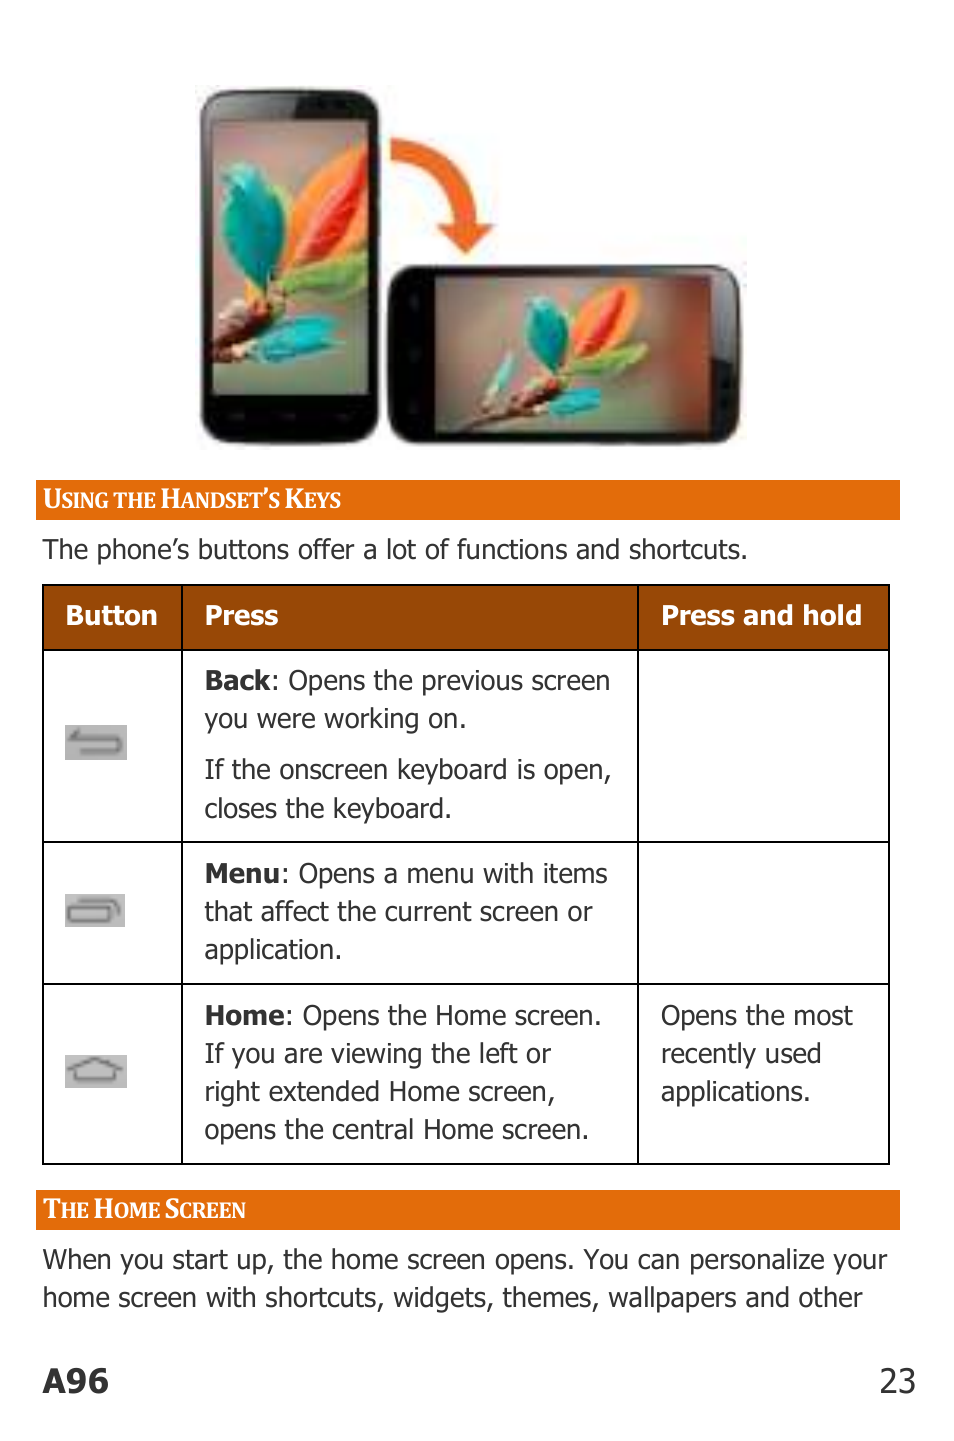 Sing the, Andset, Creen | A96 23 | Micromax Canvas Power User Manual | Page 23 / 56